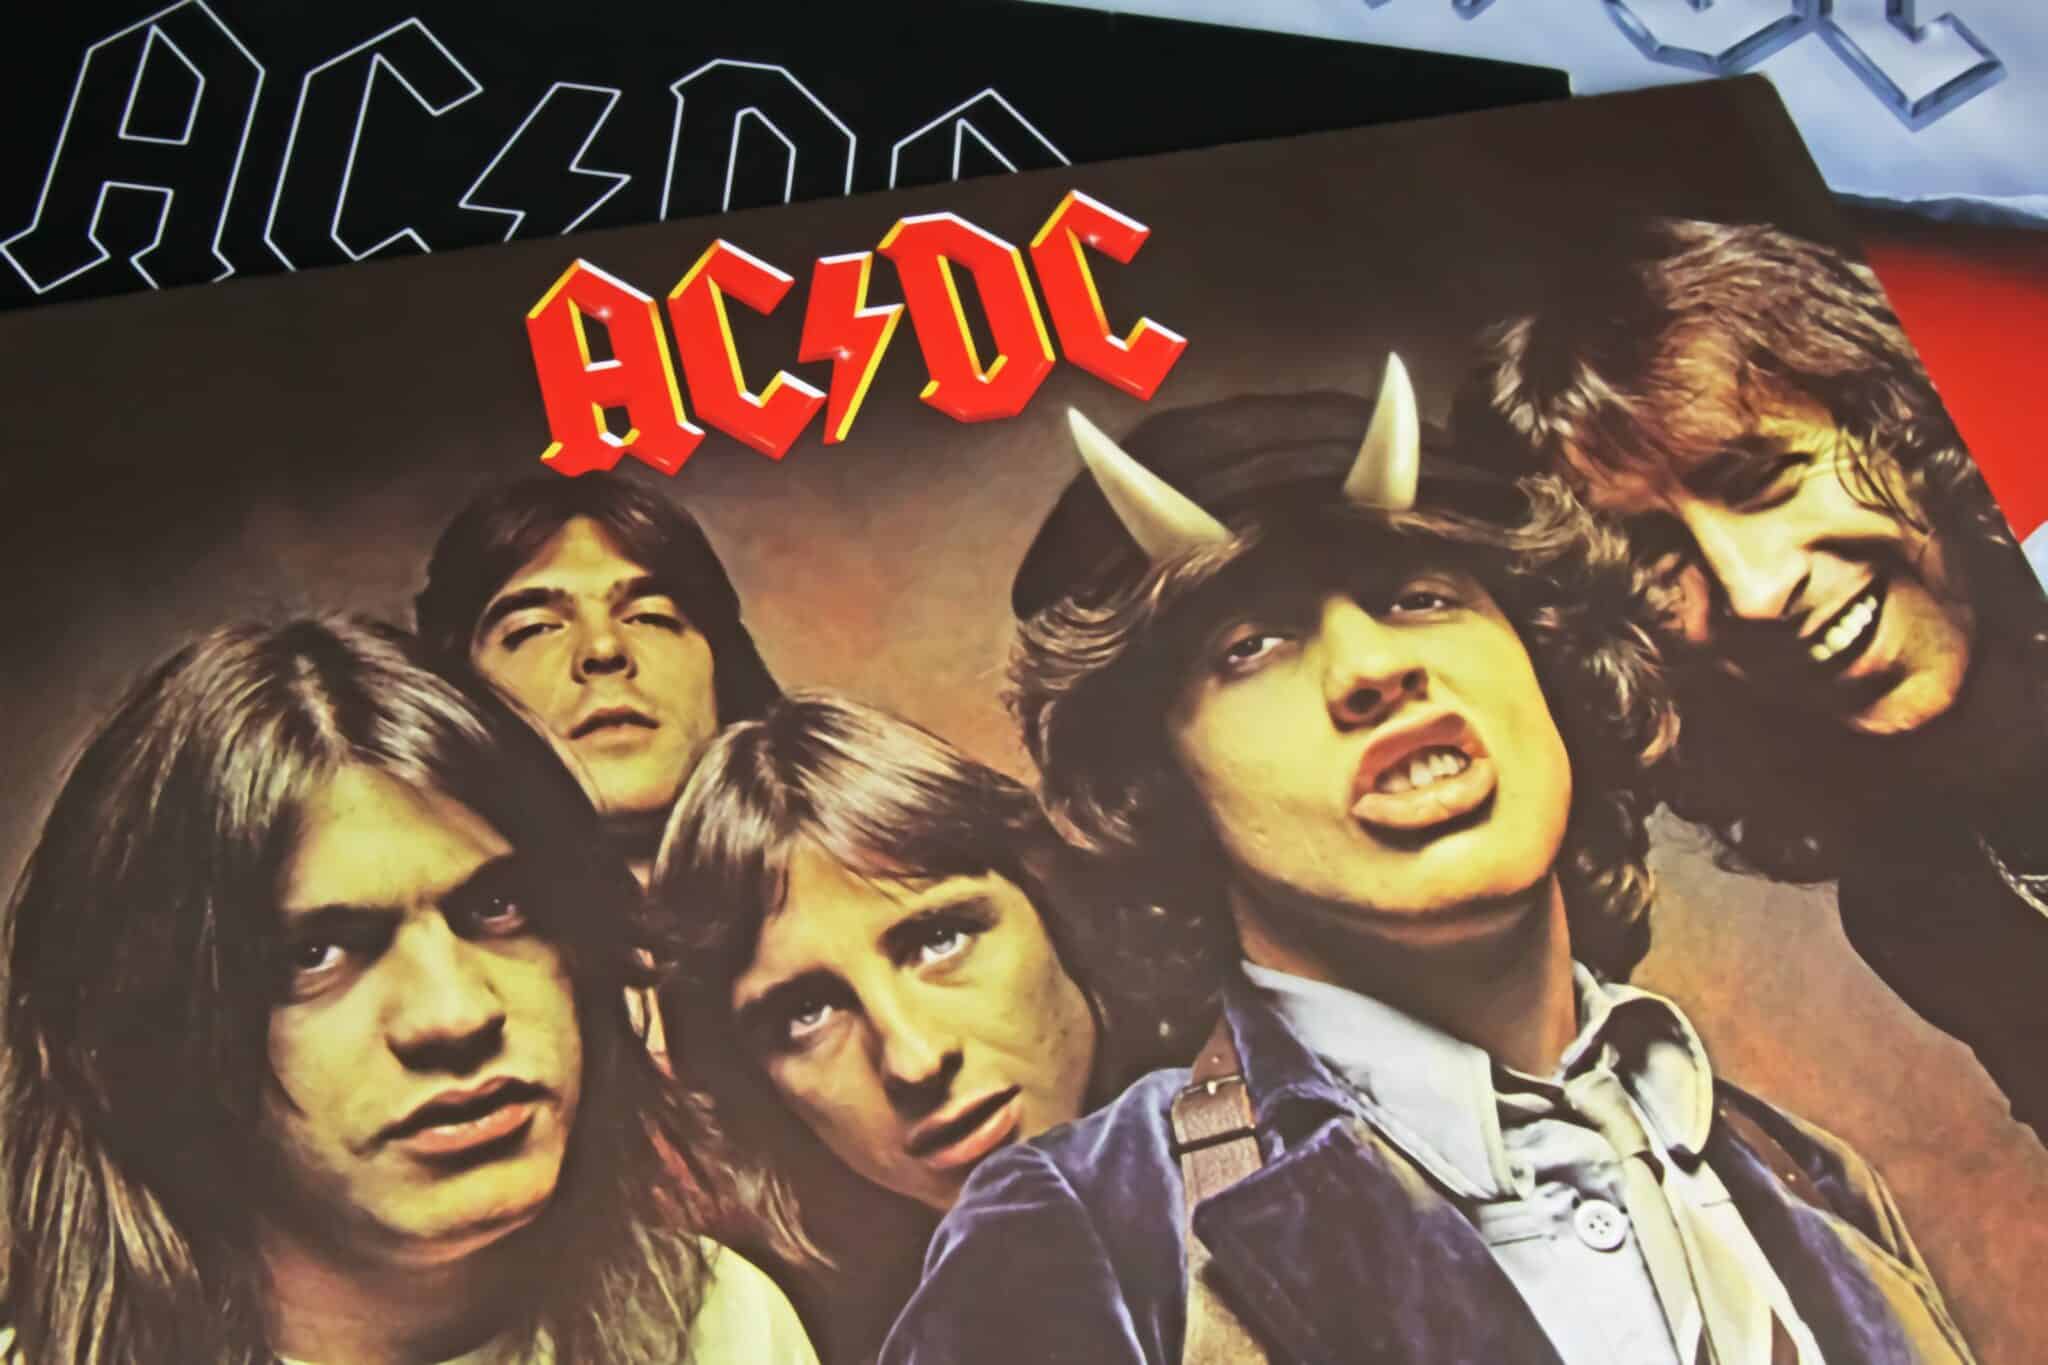 <p>Shoot to Thrill by AC/DC is another great song for a road trip playlist. The iconic opening riff is instantly recognizable, and the high-energy vocals and driving beat make it perfect for a long drive. It’s a song that will have you singing along and tapping your foot to the beat.</p>